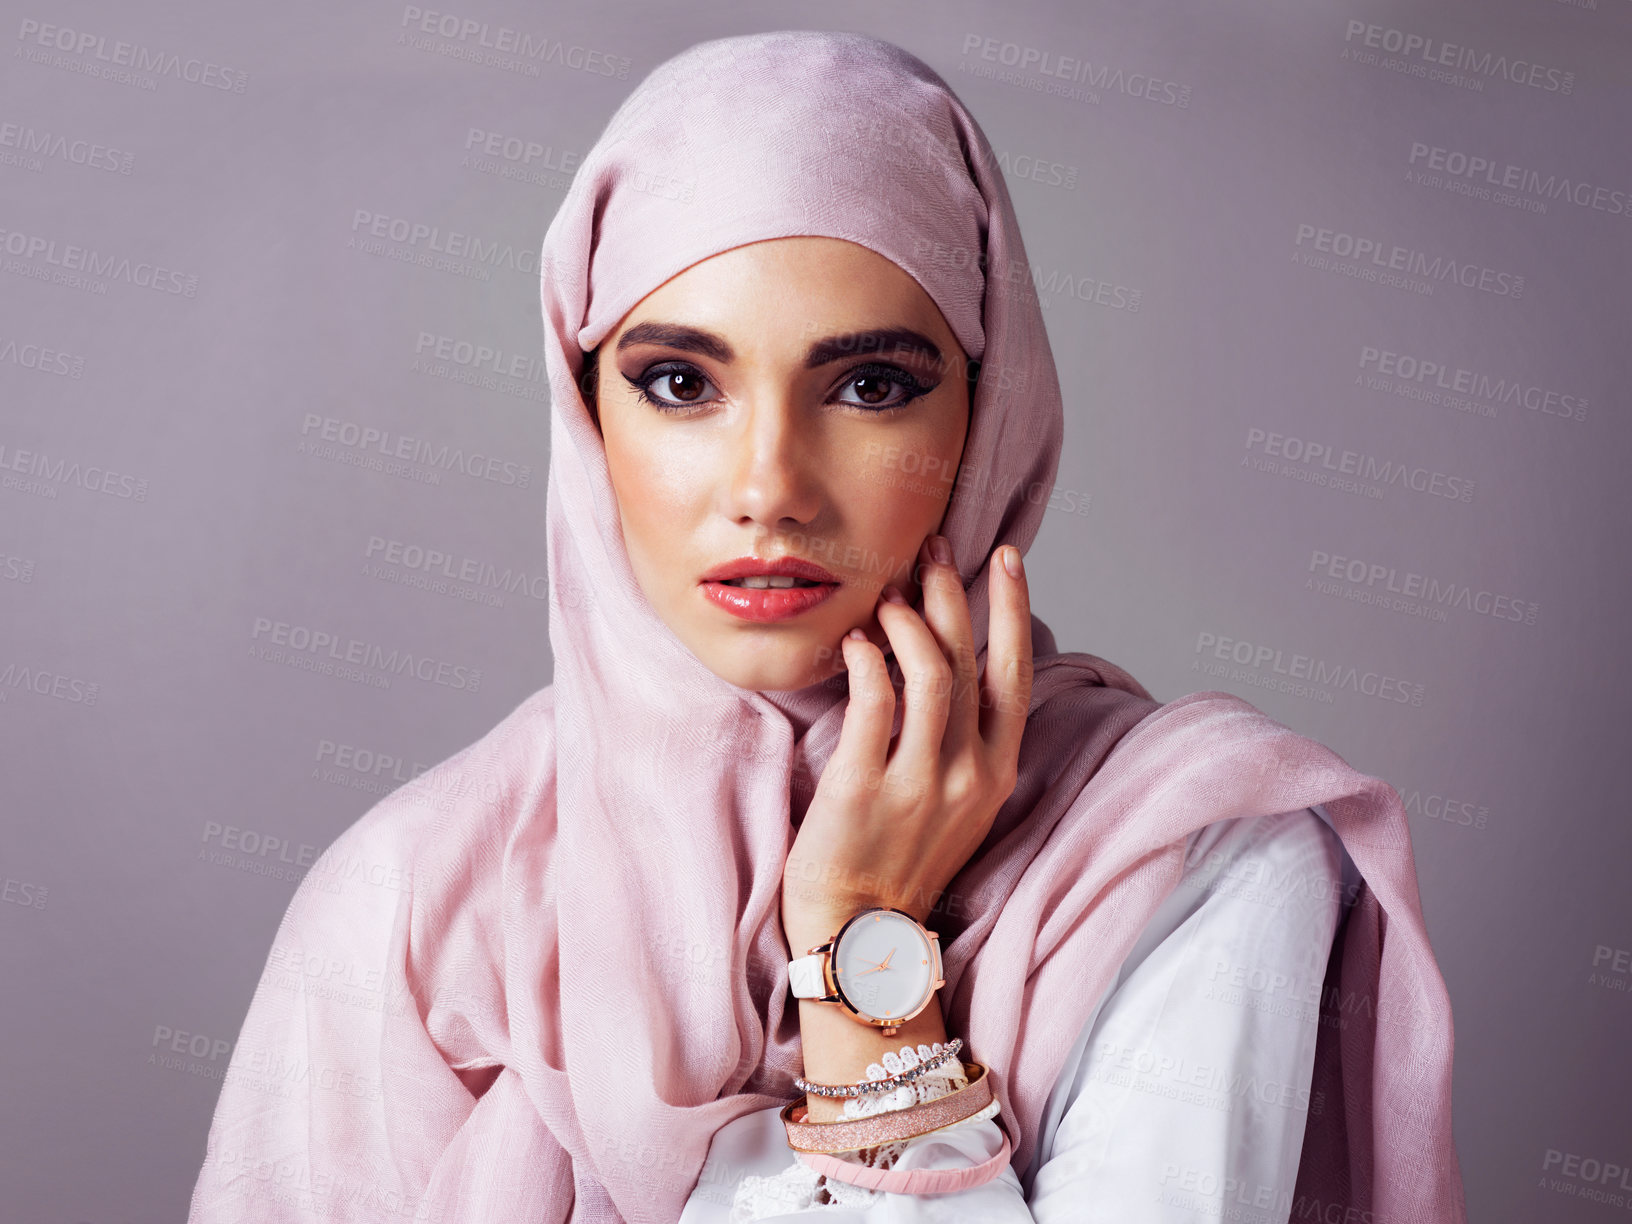 Buy stock photo Studio portrait of a cheerful young woman wearing a colorful head scarf while posing against a grey background